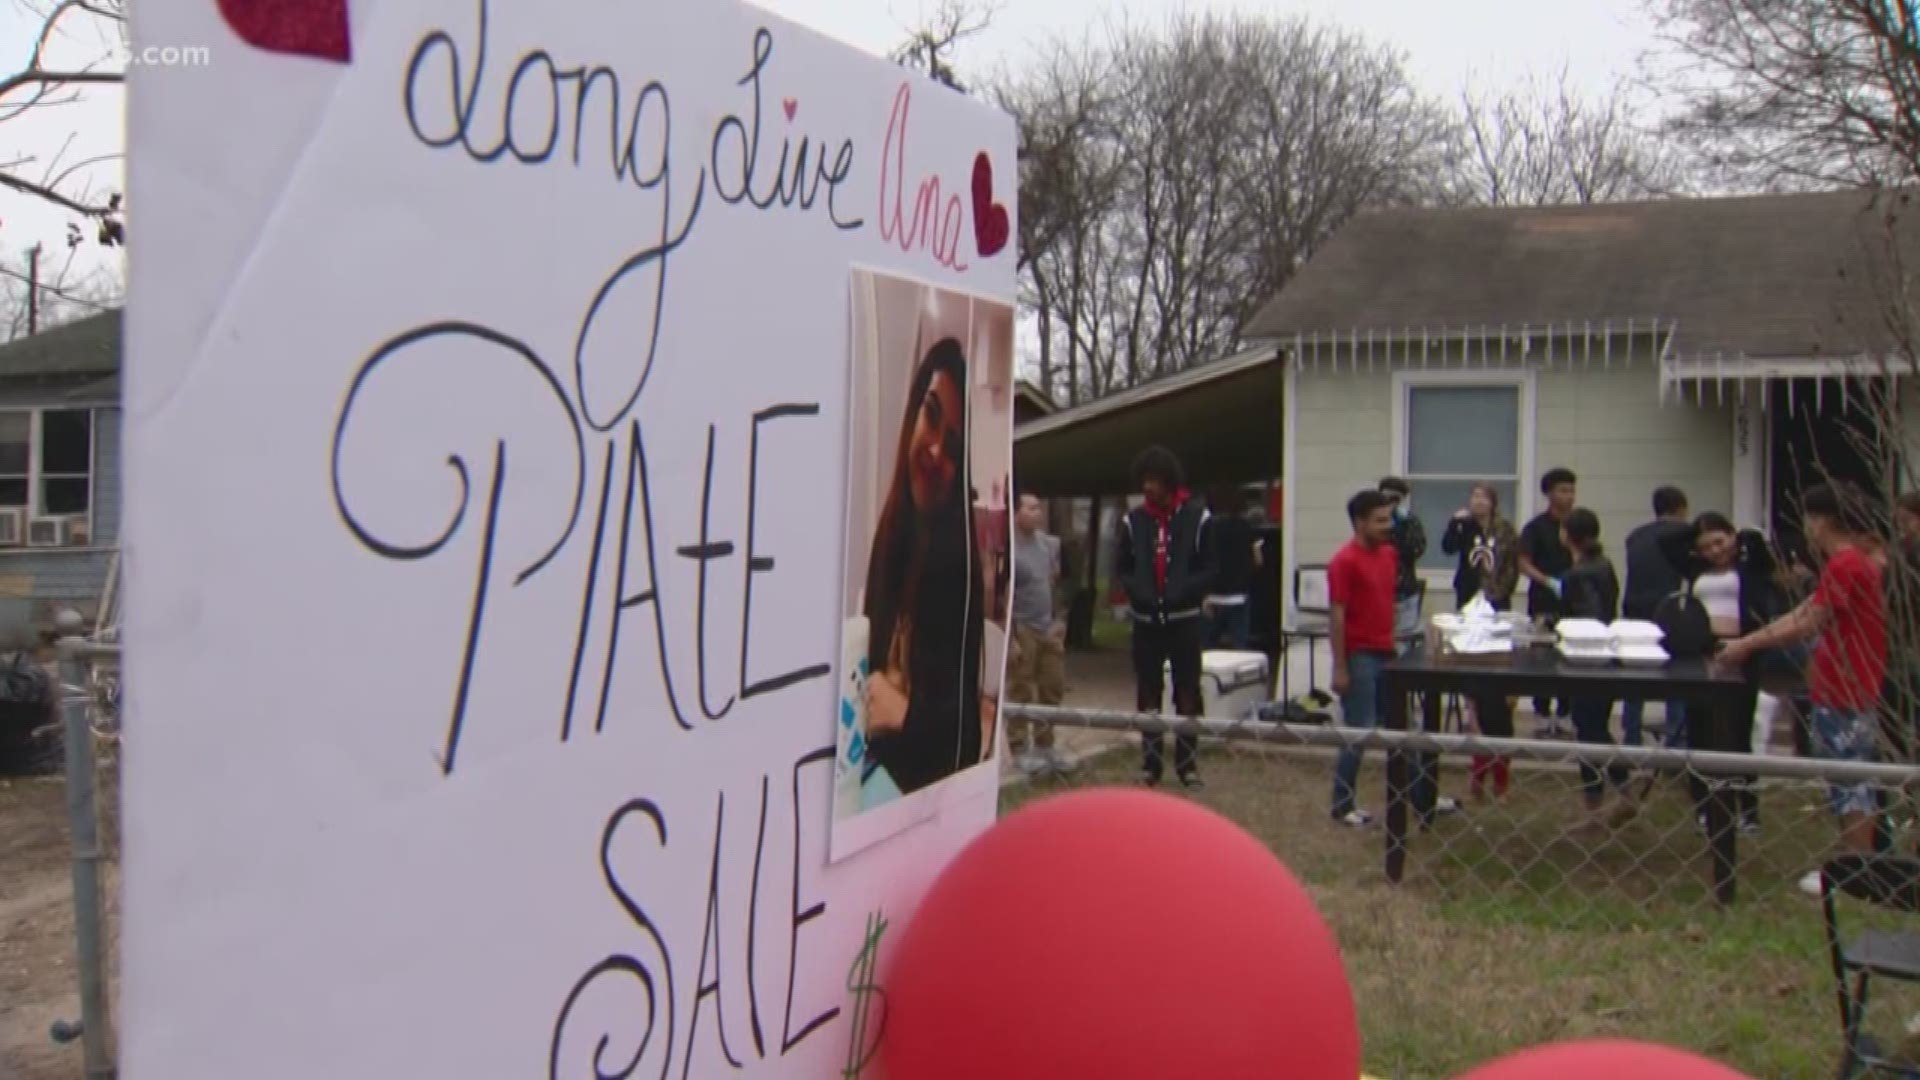 Family and friends of a 19-year-old shot and killed earlier this week gather to raise funds for her funeral.